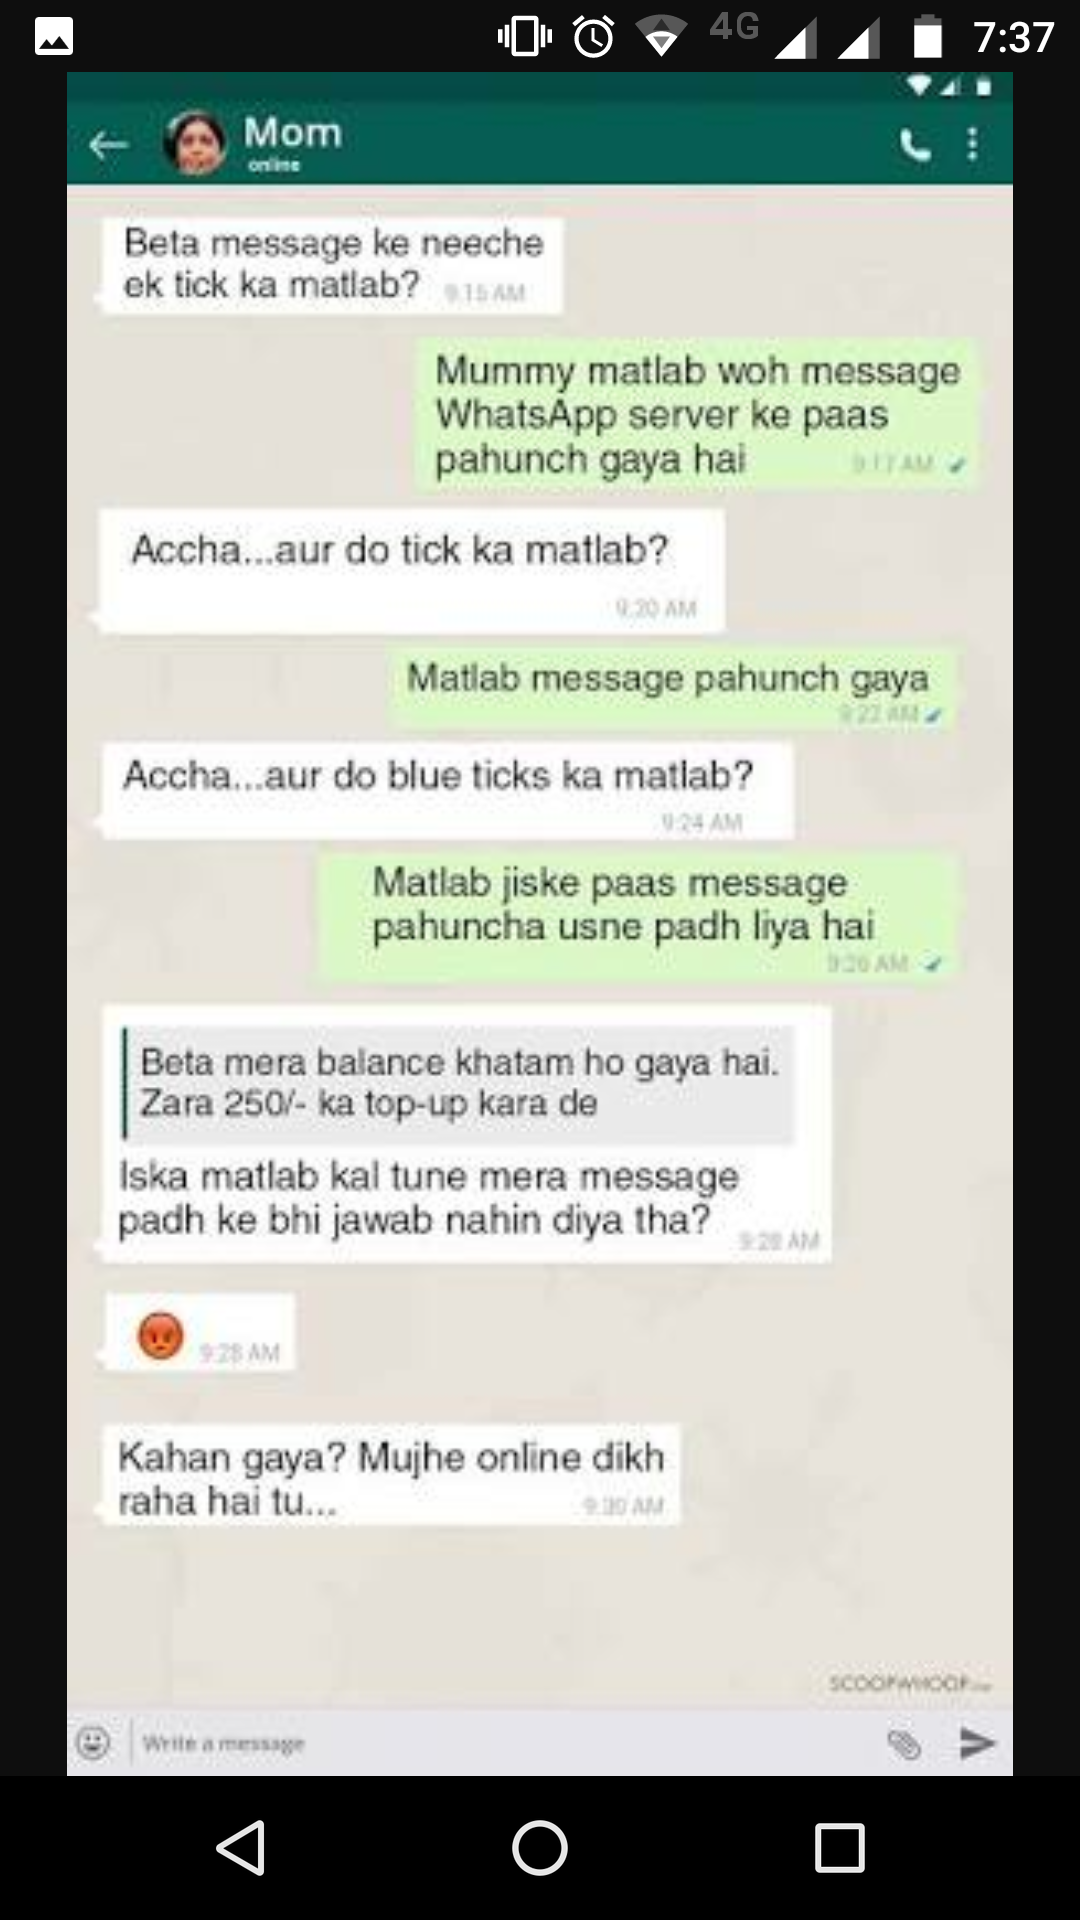 Funny WhatsApp conversation with mom that make you wonder why your mom is  on whatsapp. - Page 5 of 9 - ProudlyIMperfect